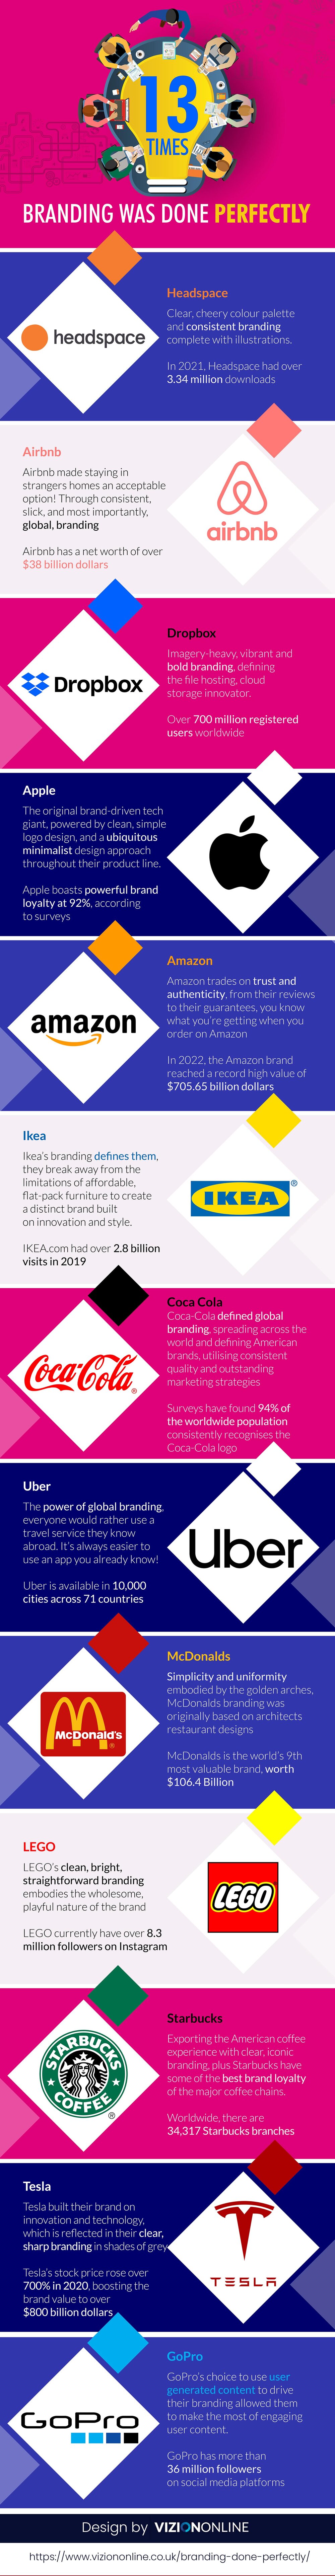 13 Times Branding Was Done Perfectly - Infographic